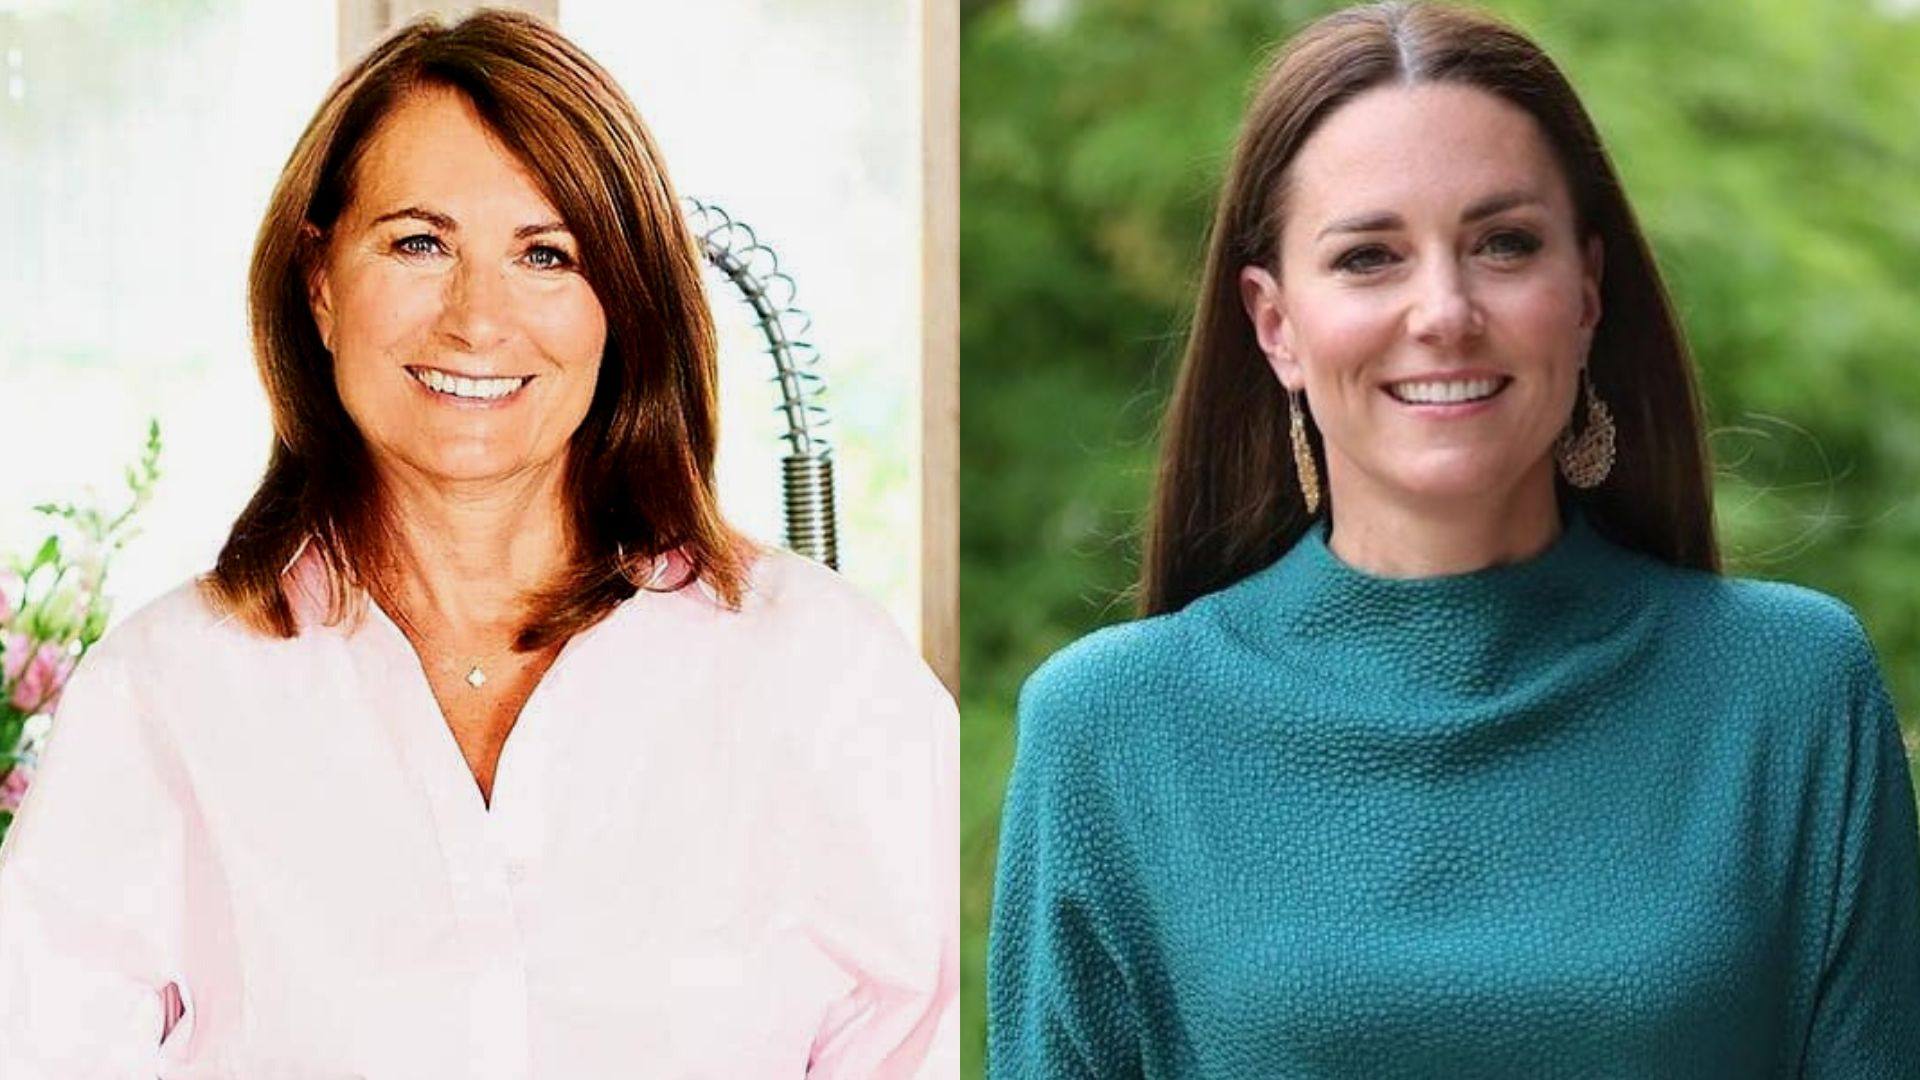 Carole Middleton (left) and the Princess of Wales, Kate Middleton (right) share several similarities – and a close bond. Photos: @life.of.future.queen, @partypieces/Instagram